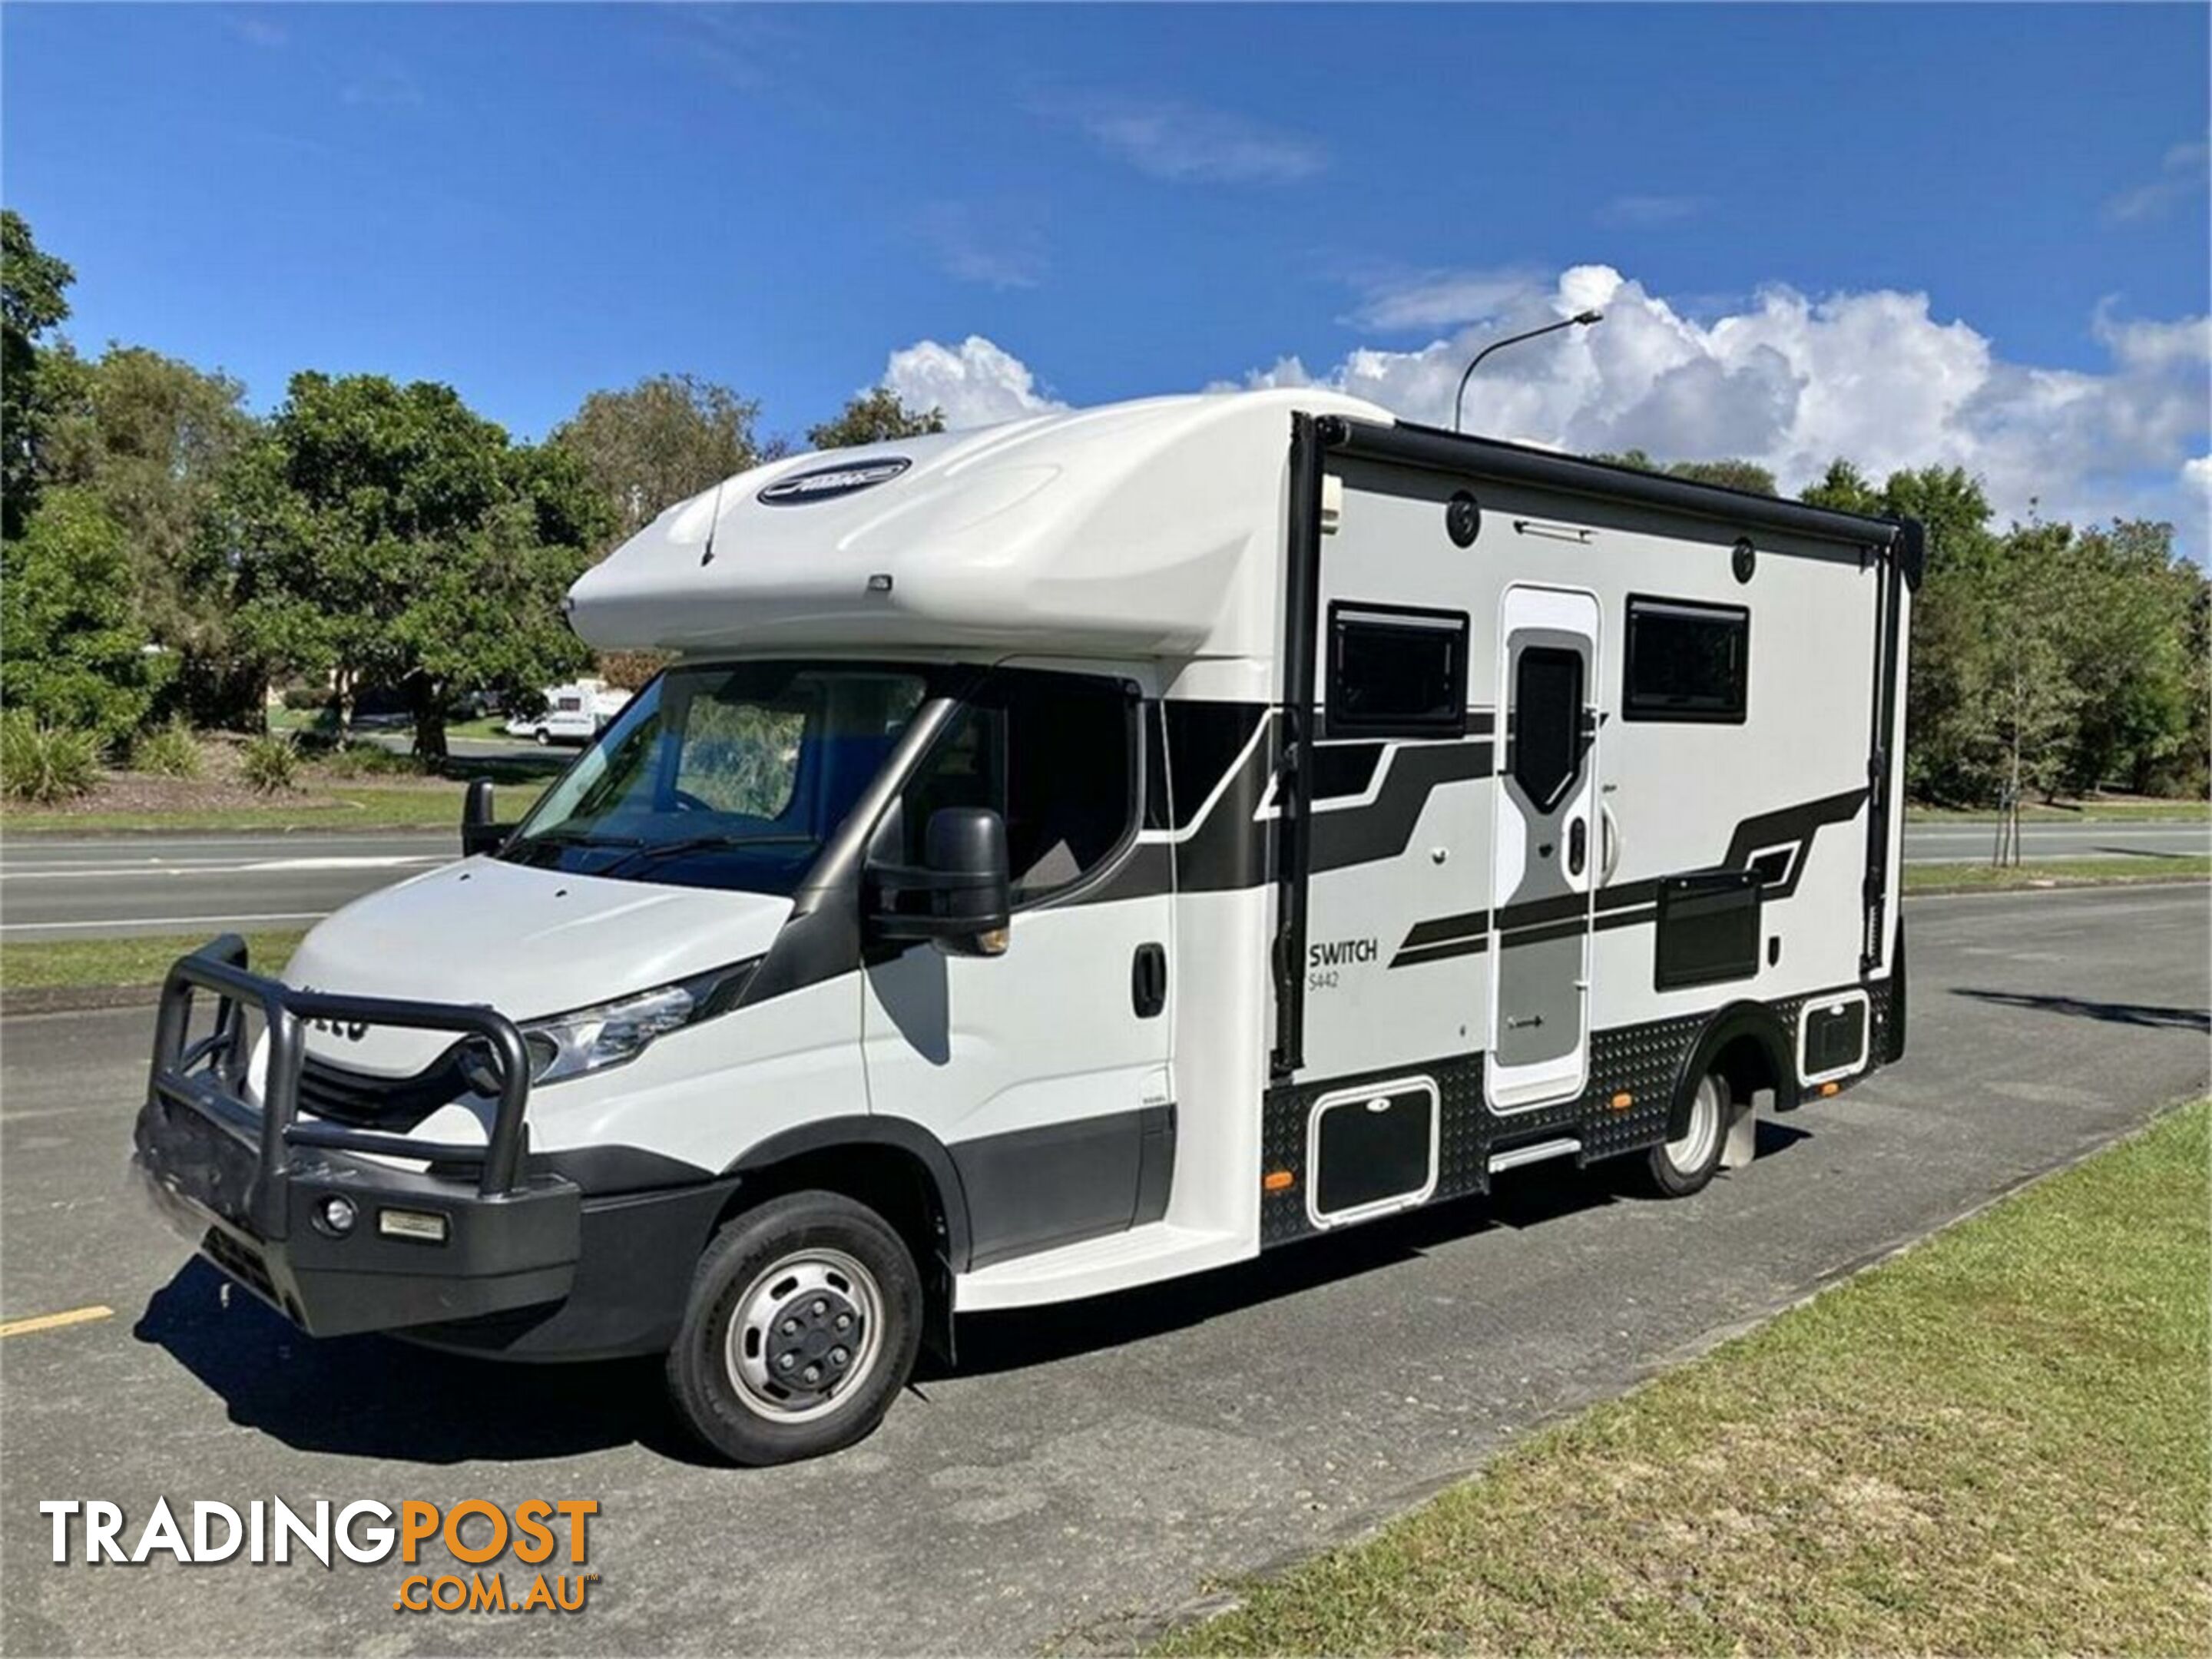 2021 Sunliner Switch S442 Motor Home